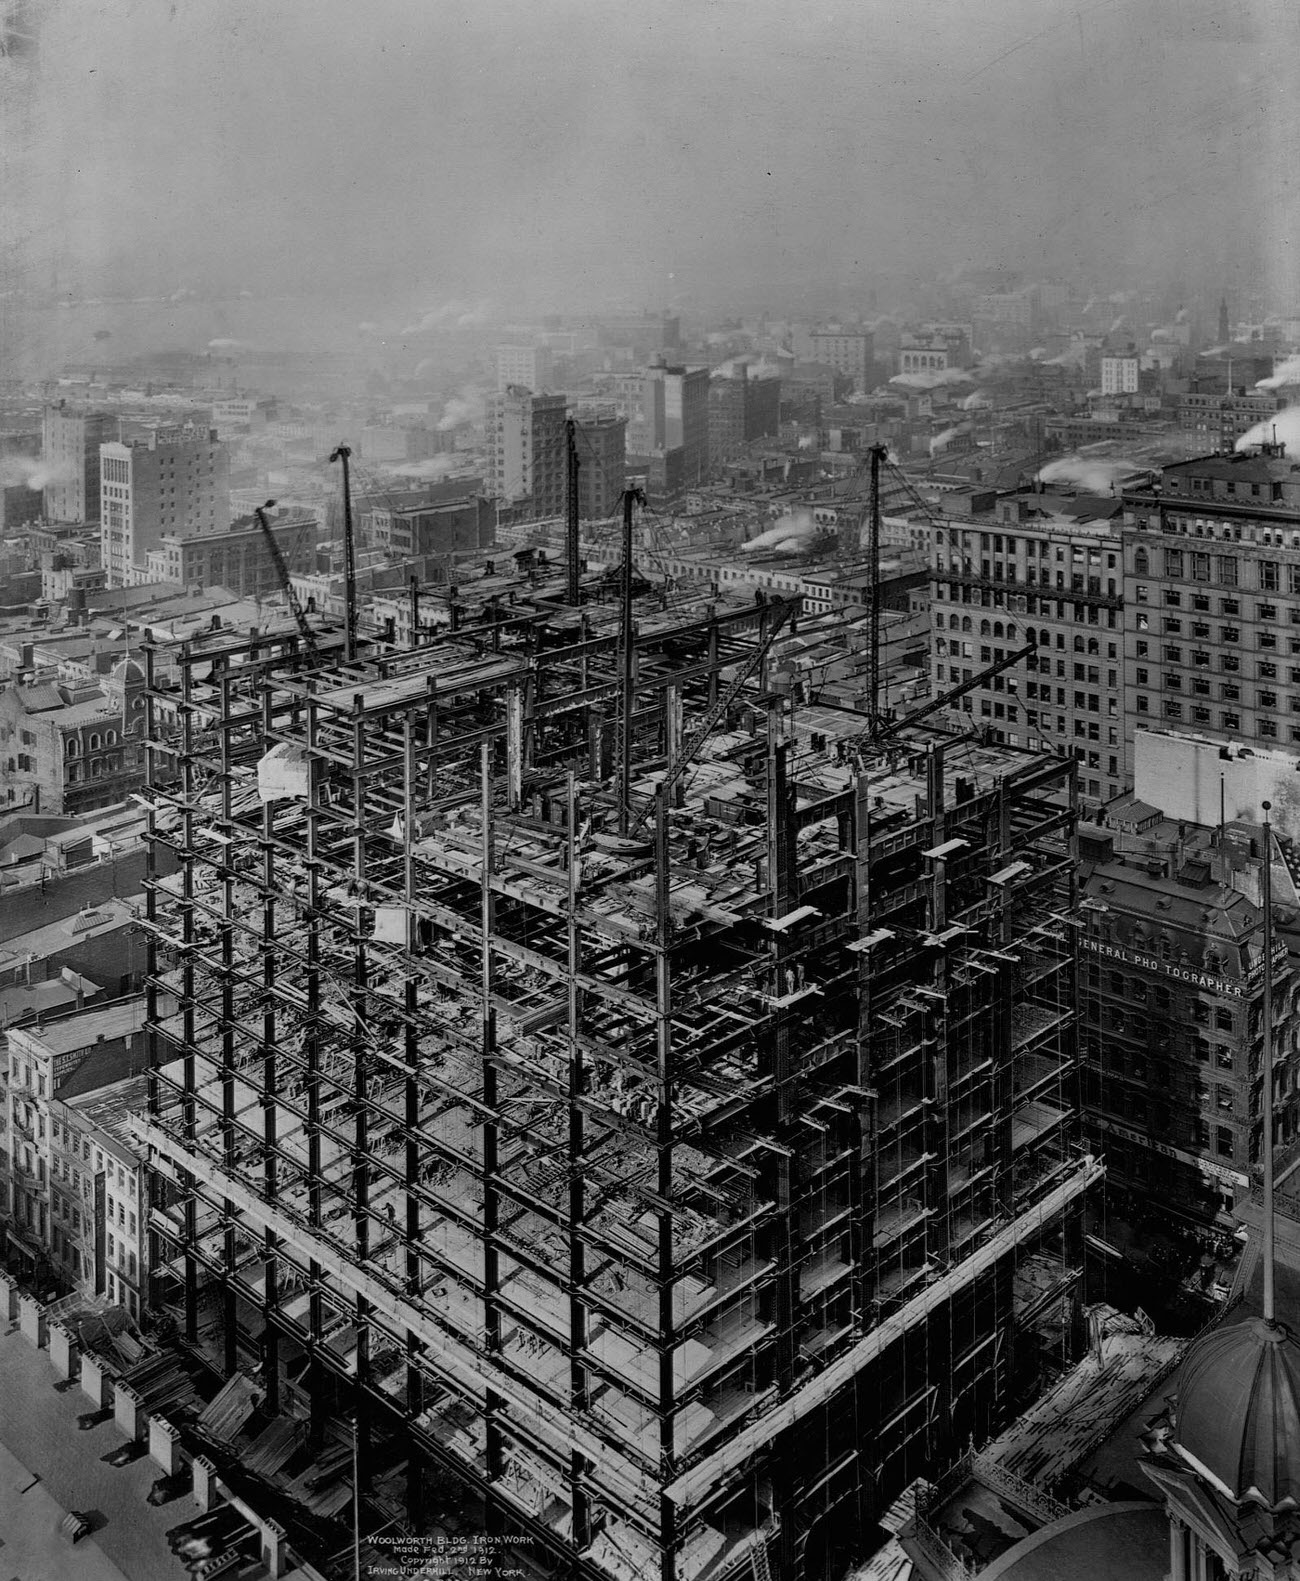 Construction Procedes On The Woolworth Building Erected At 233 Broadway, 1913